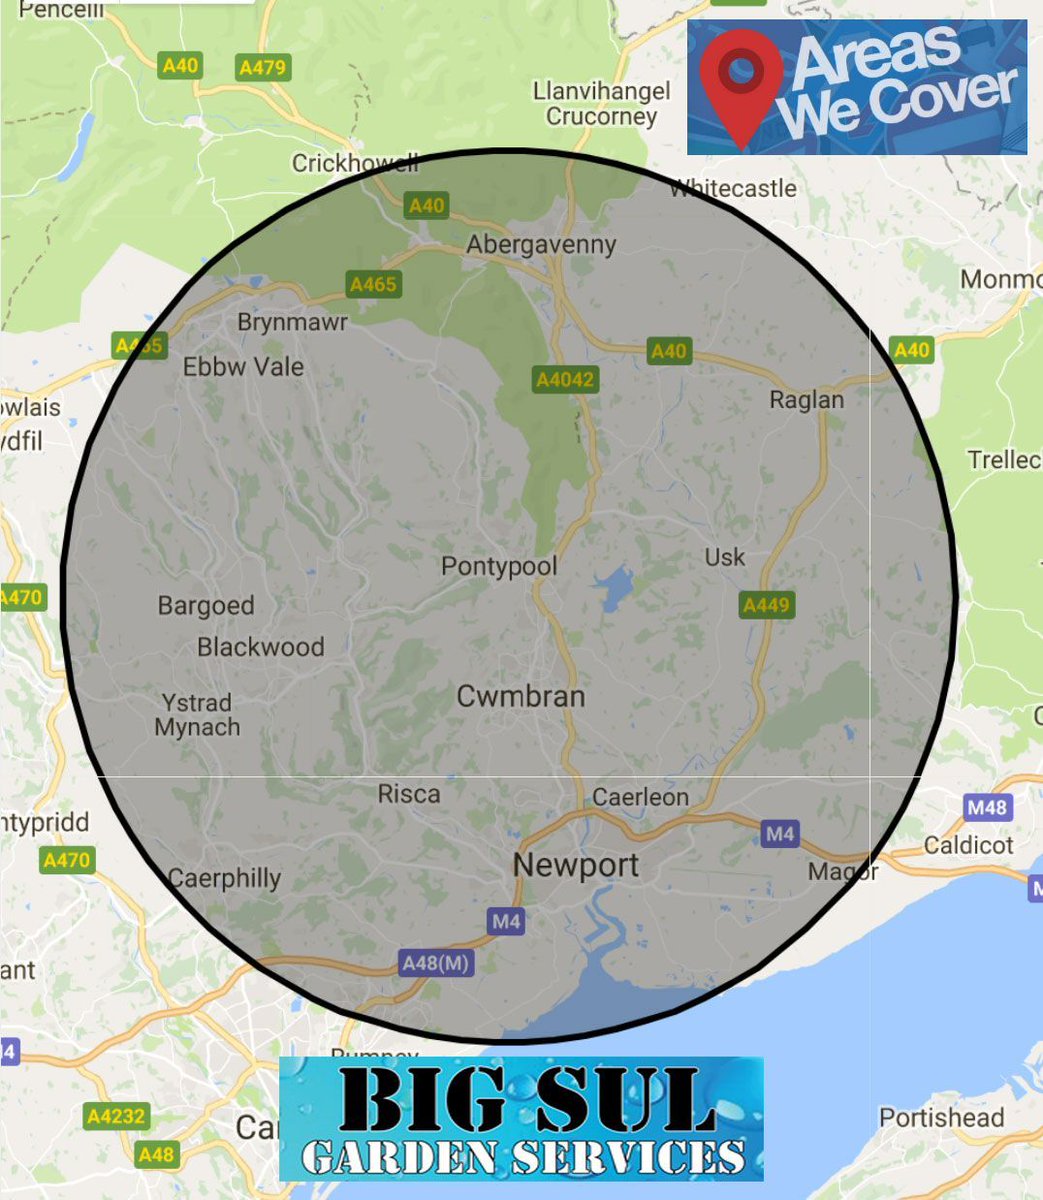 If you need a job done and your not sure if we cover your area check our website, drop us a line or call to check. bigsul.com/locations-we-c…